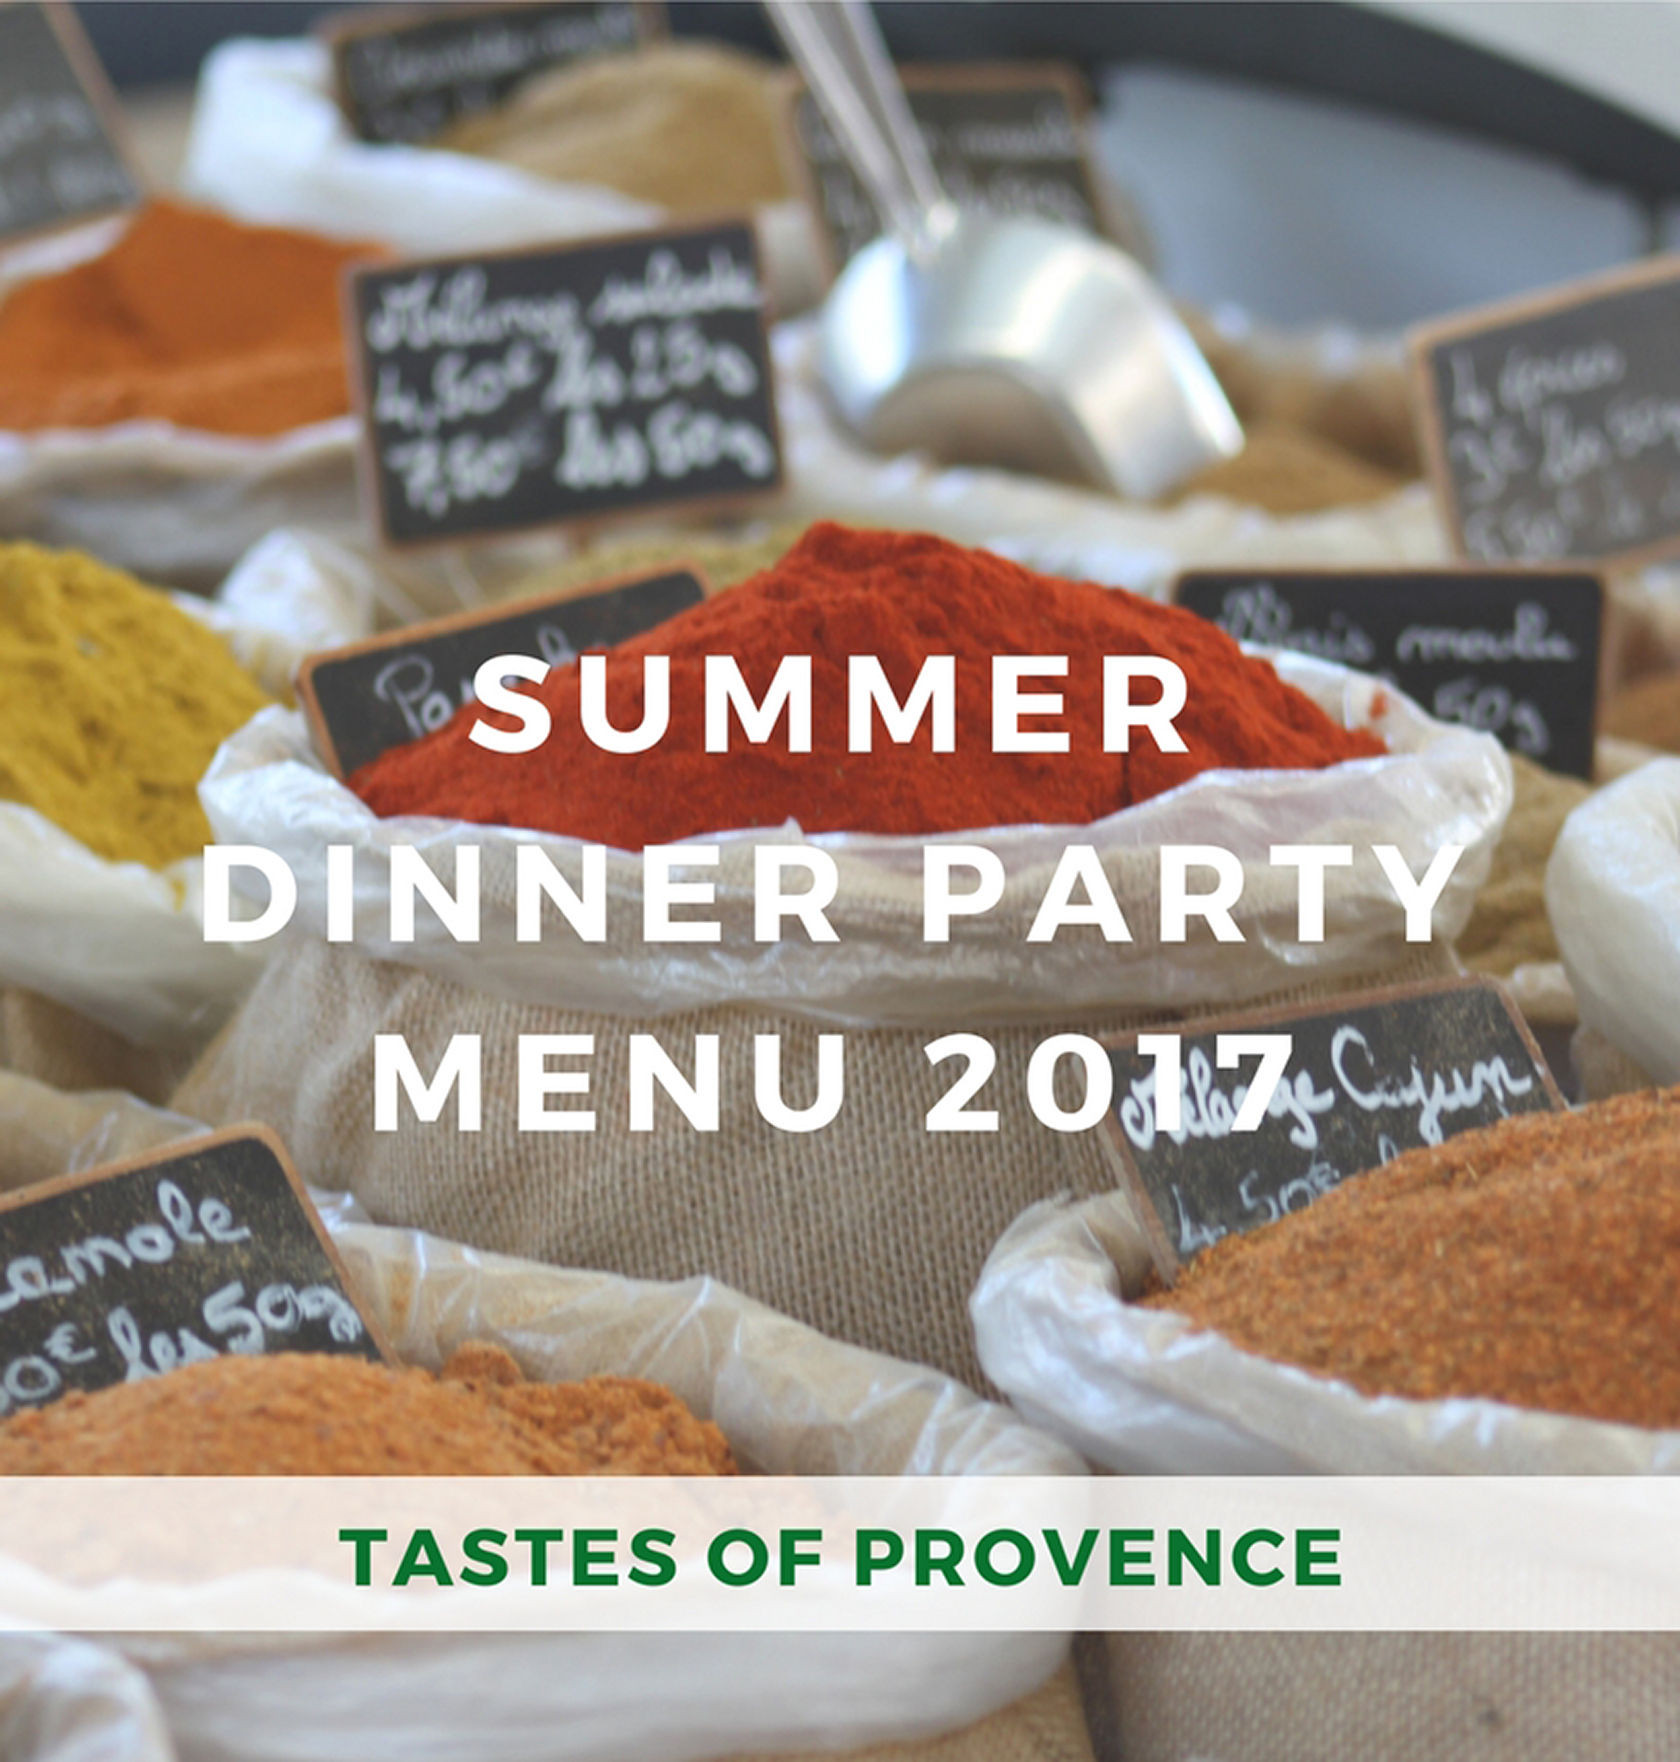 Summer Dinner Party Menu
 Tastes of Provence a Summer Dinner Party Menu Perfectly